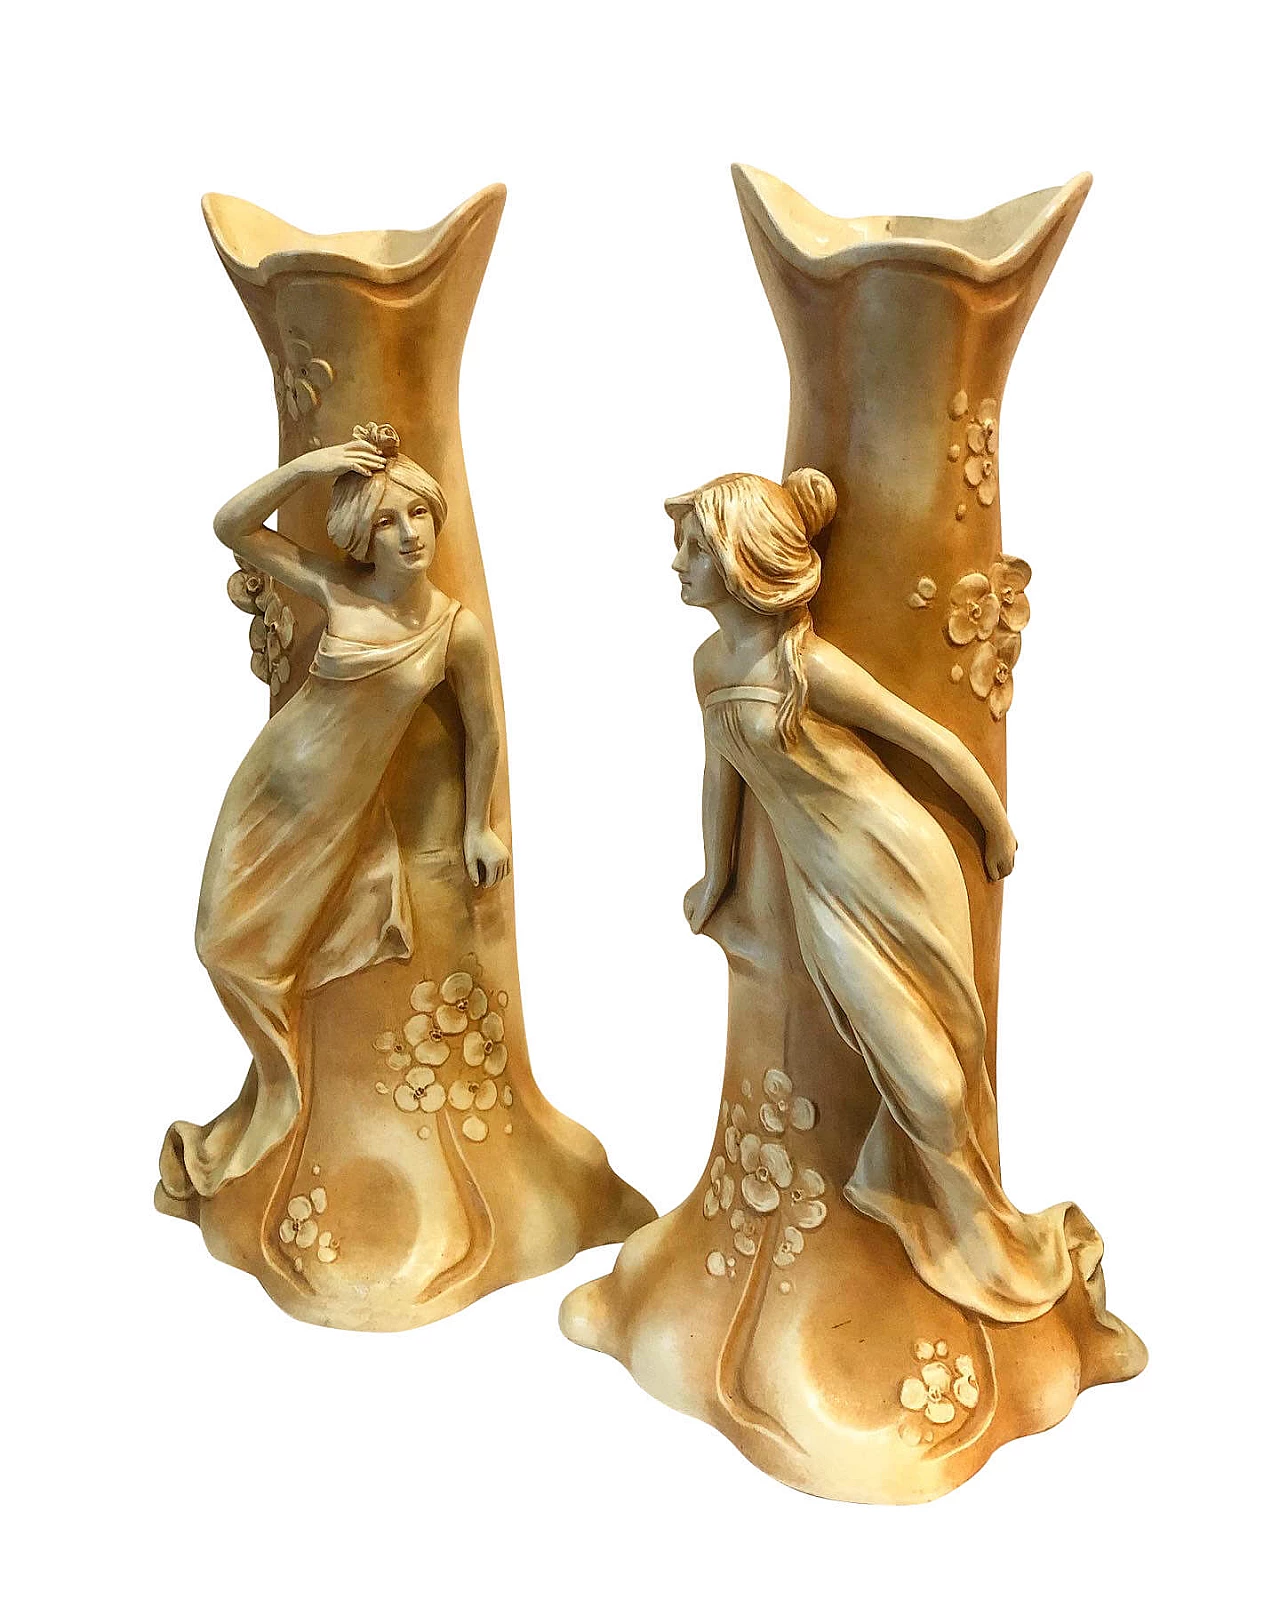 Pair of Art Nouveau sculpture vases by Bernhard Bloch, early 20th century 1250666